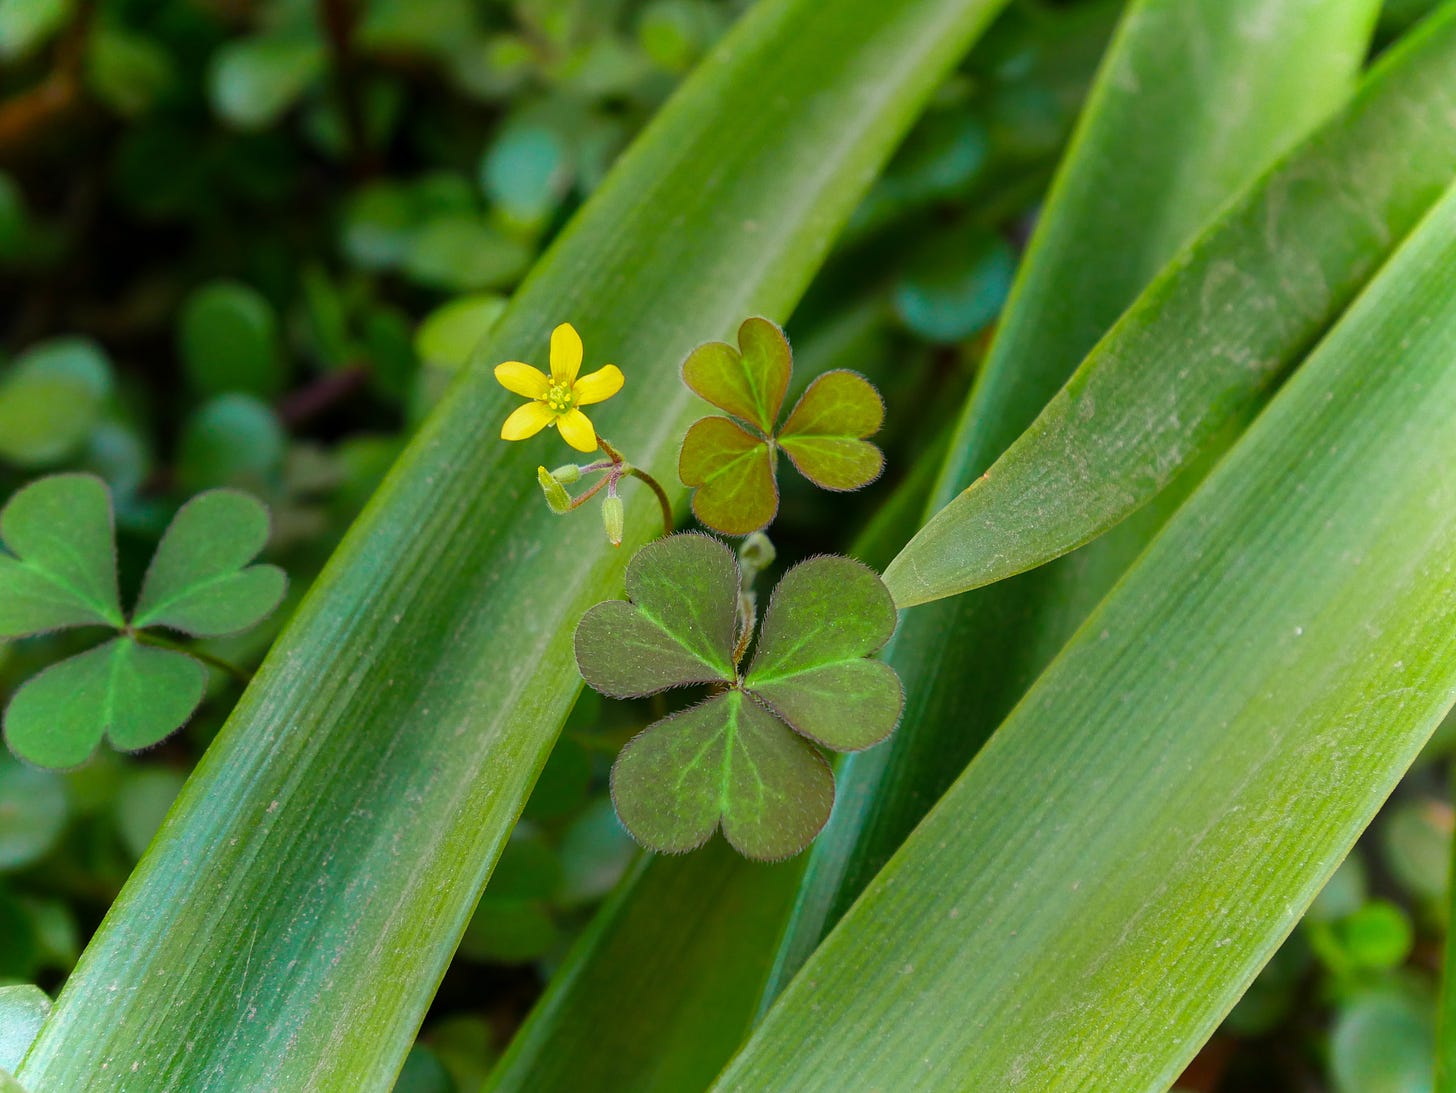 A tiny yellow flower with clover leaves, standing out against the green of a larger plant in the background